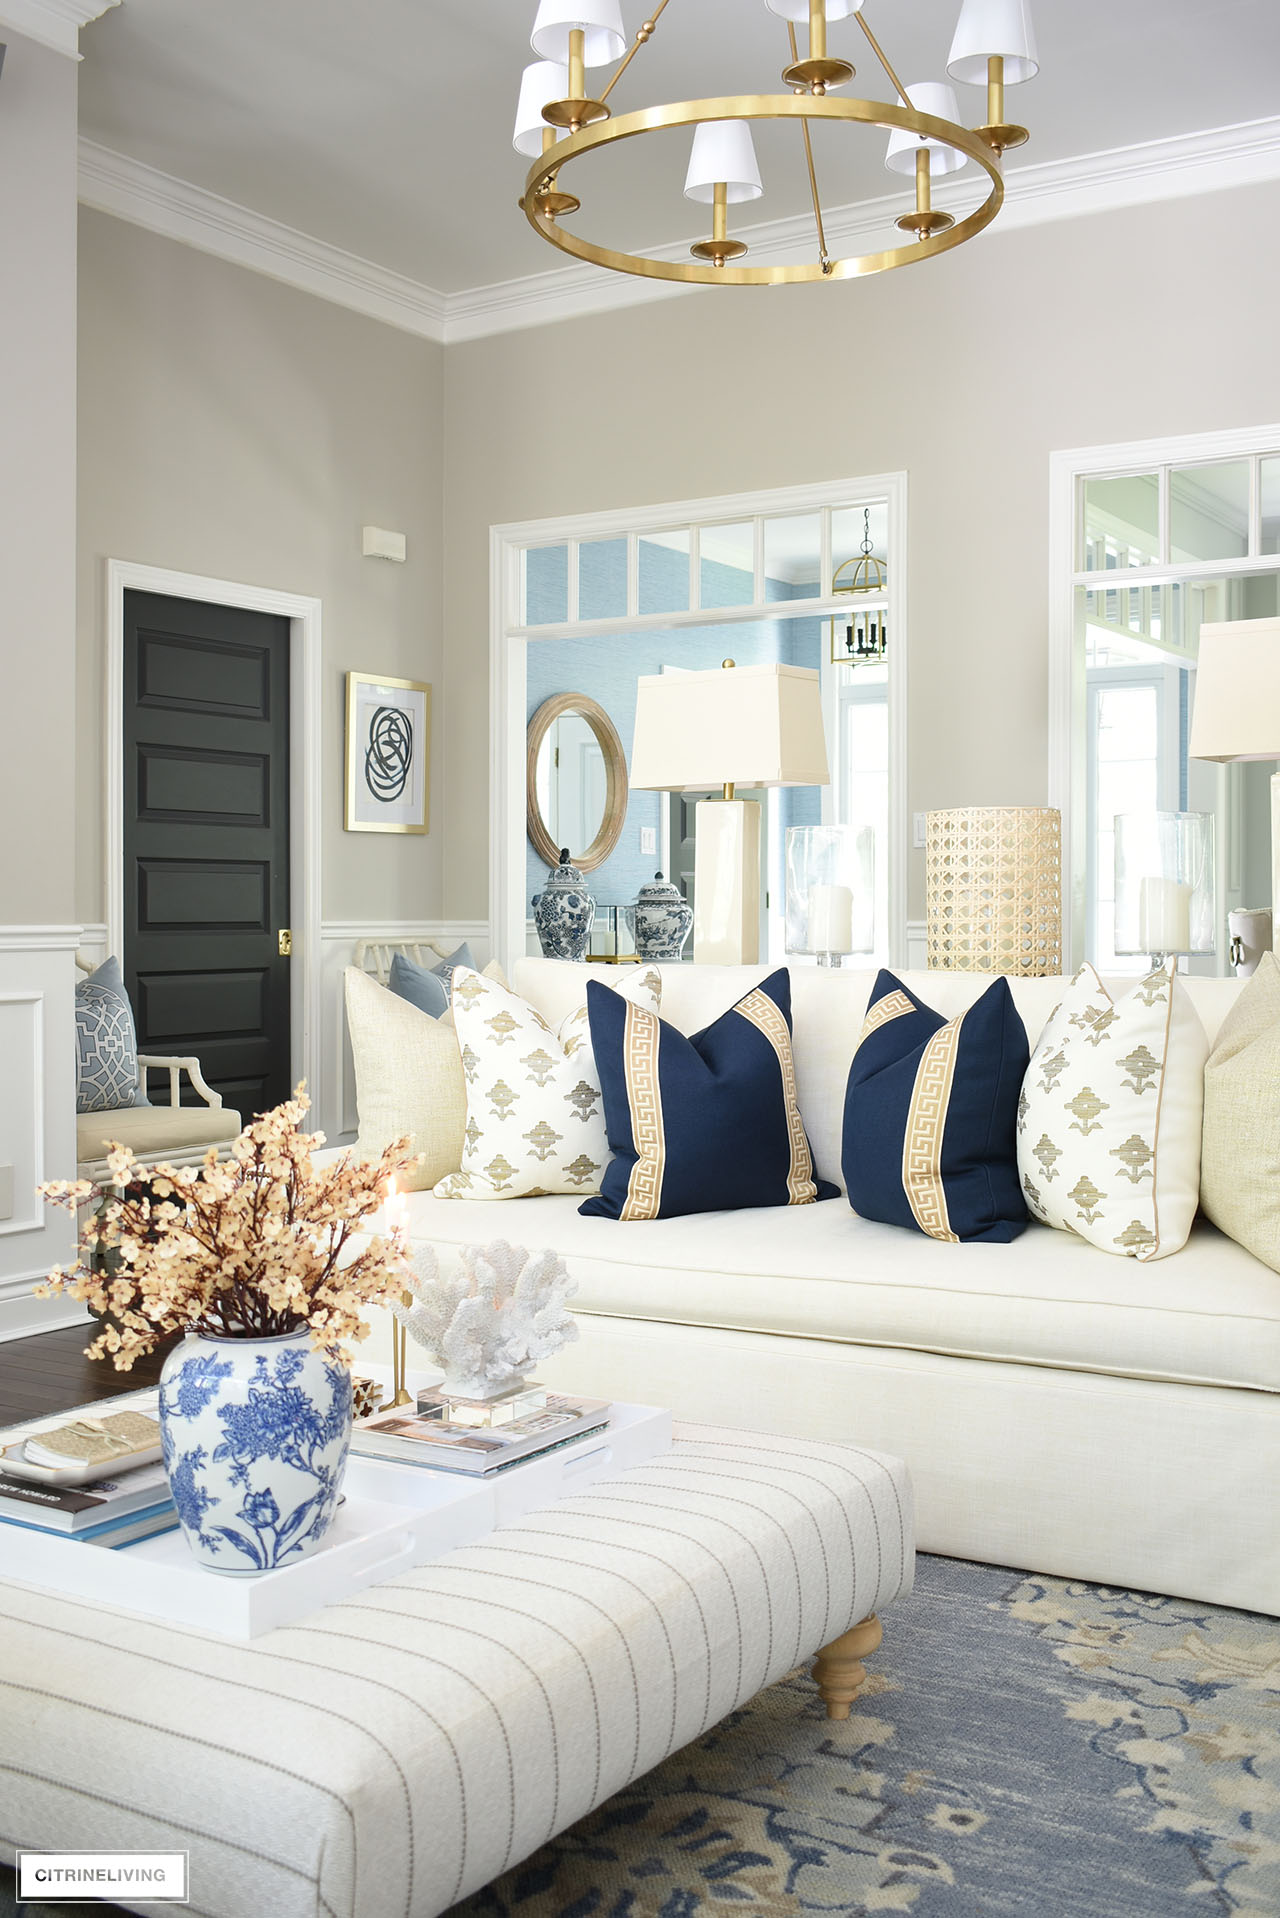 Neutral living room styled for fall with chic navy blue, tan ad gold pillows and accents.